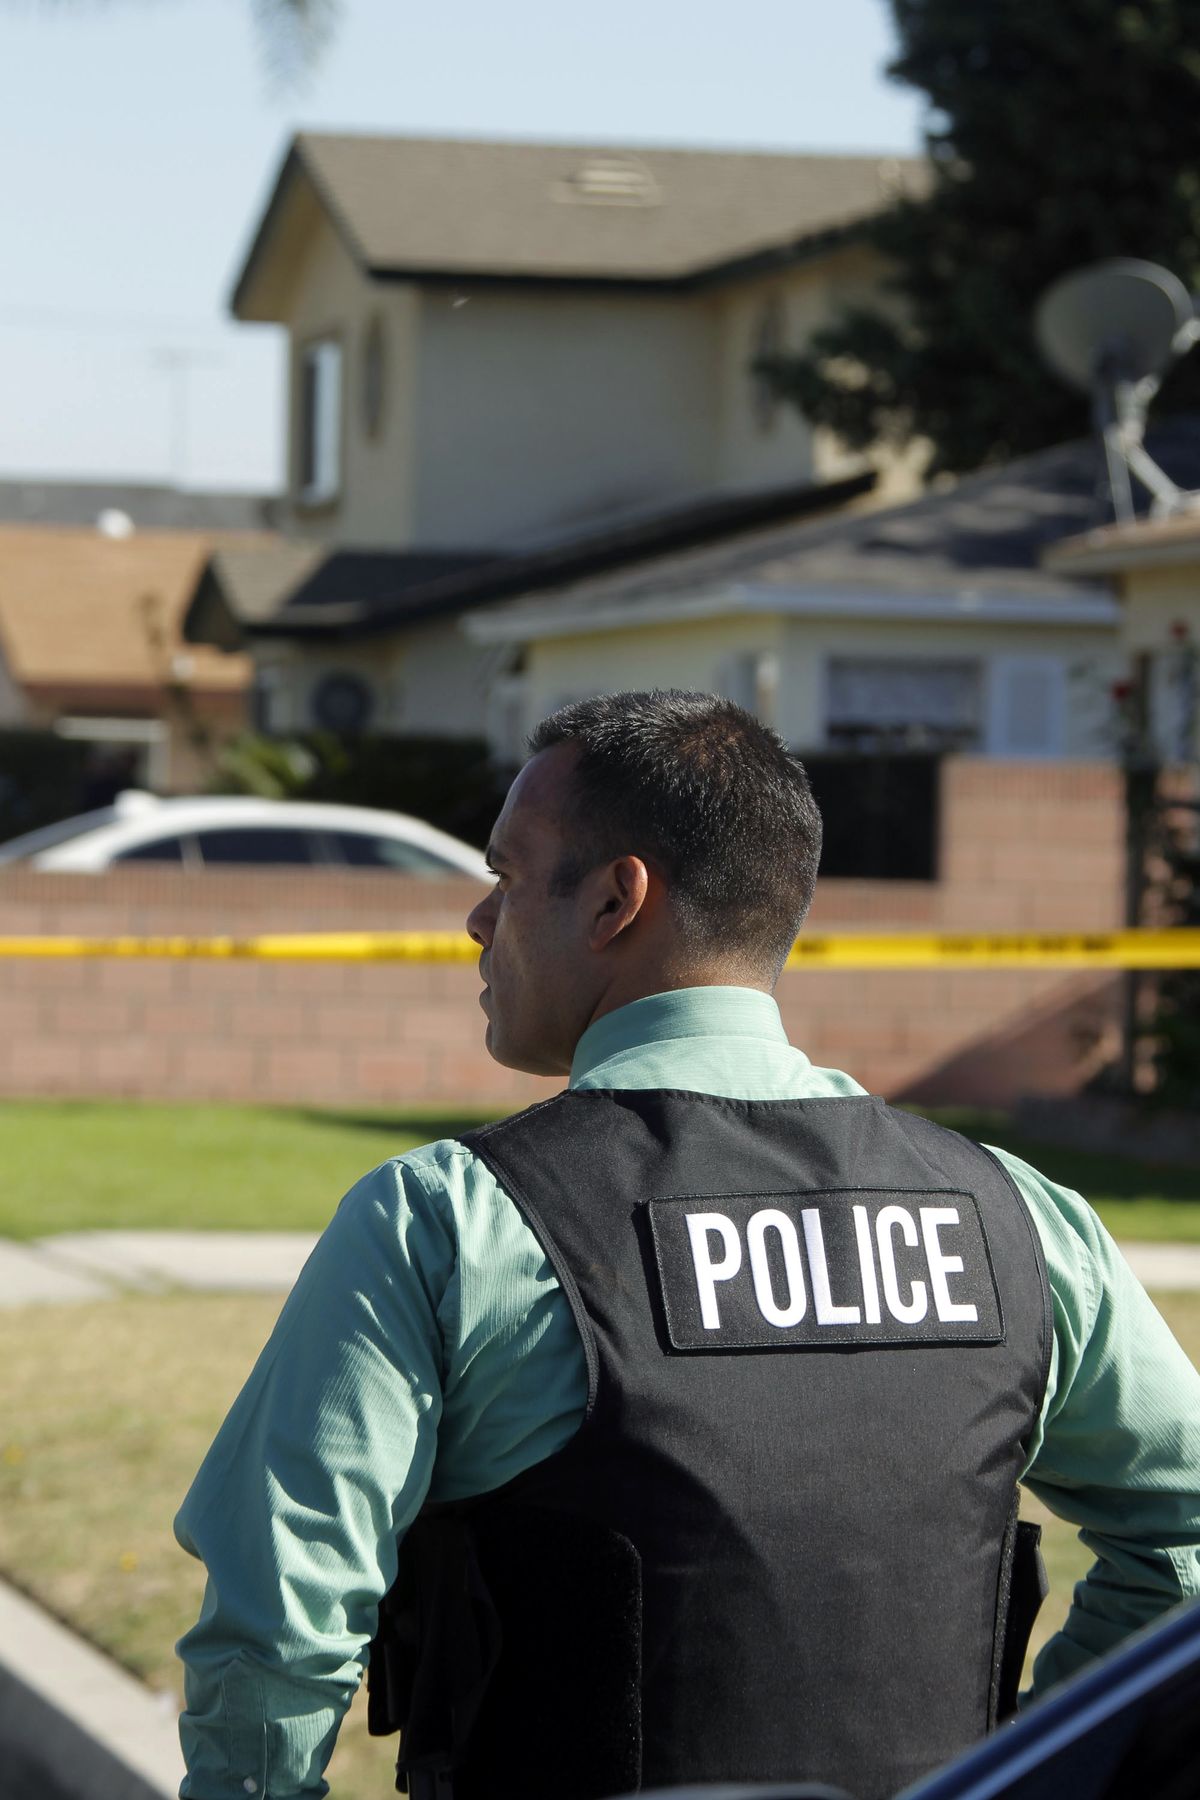 A police officer is seen down the street from the two-story home, background, where one person was found shot to death in Downey, Calif., Wednesday, Oct. 24, 2012.  Five people were shot and at least two died in shootings at a business and a residence in the Los Angeles suburb Wednesday, according to Downey police Lt. Dean Milligan.  The shootings occurred shortly after 11 a.m. at a business and at a nearby home, where family members of the business owner live. A woman was found dead at the home, he said. (Nick Ut / Associated Press)